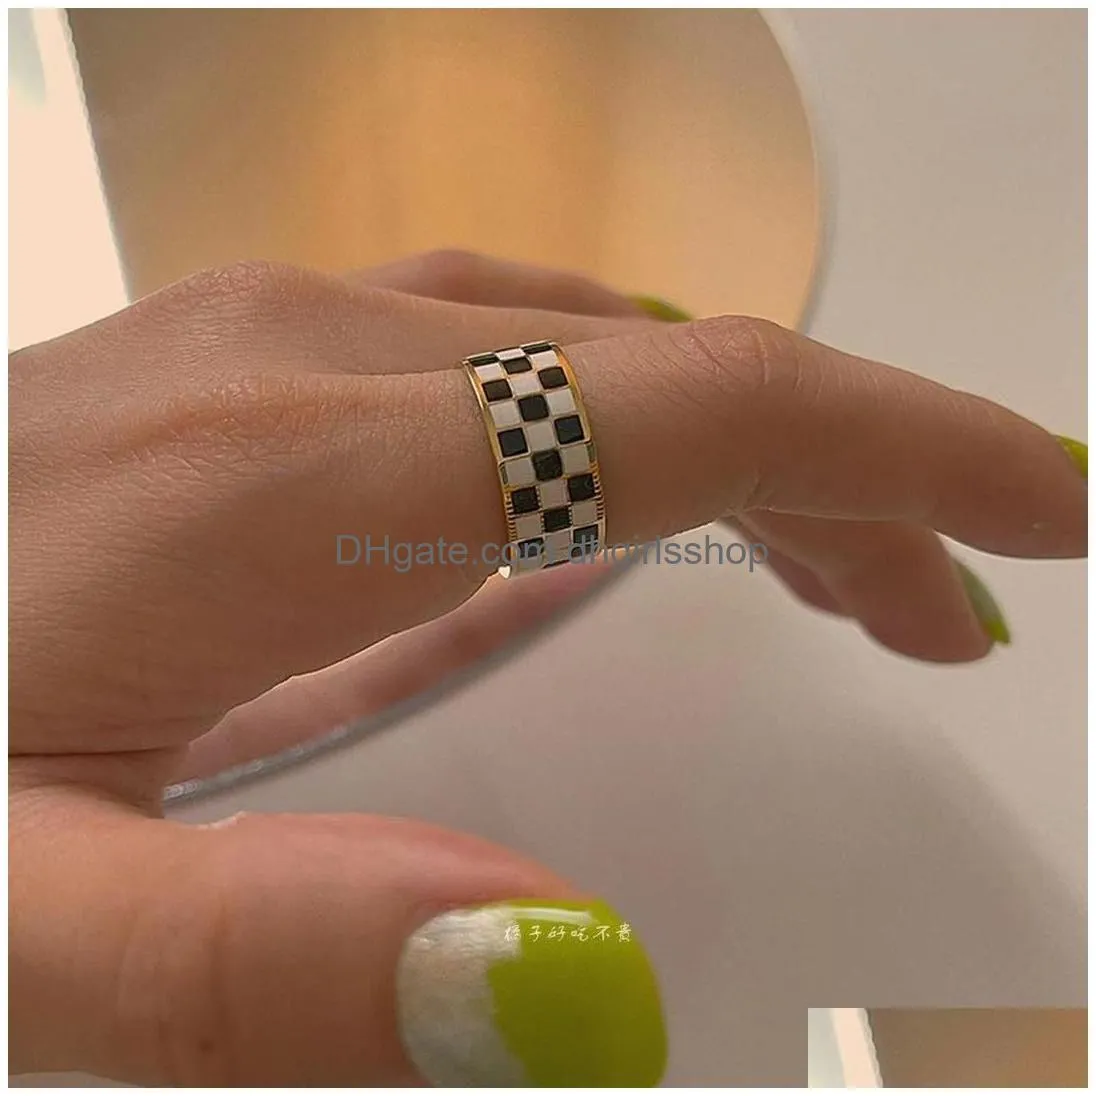 6mm classic band rings jewelry for women checkerboard simple black and white plaid ring handmade luxury gift